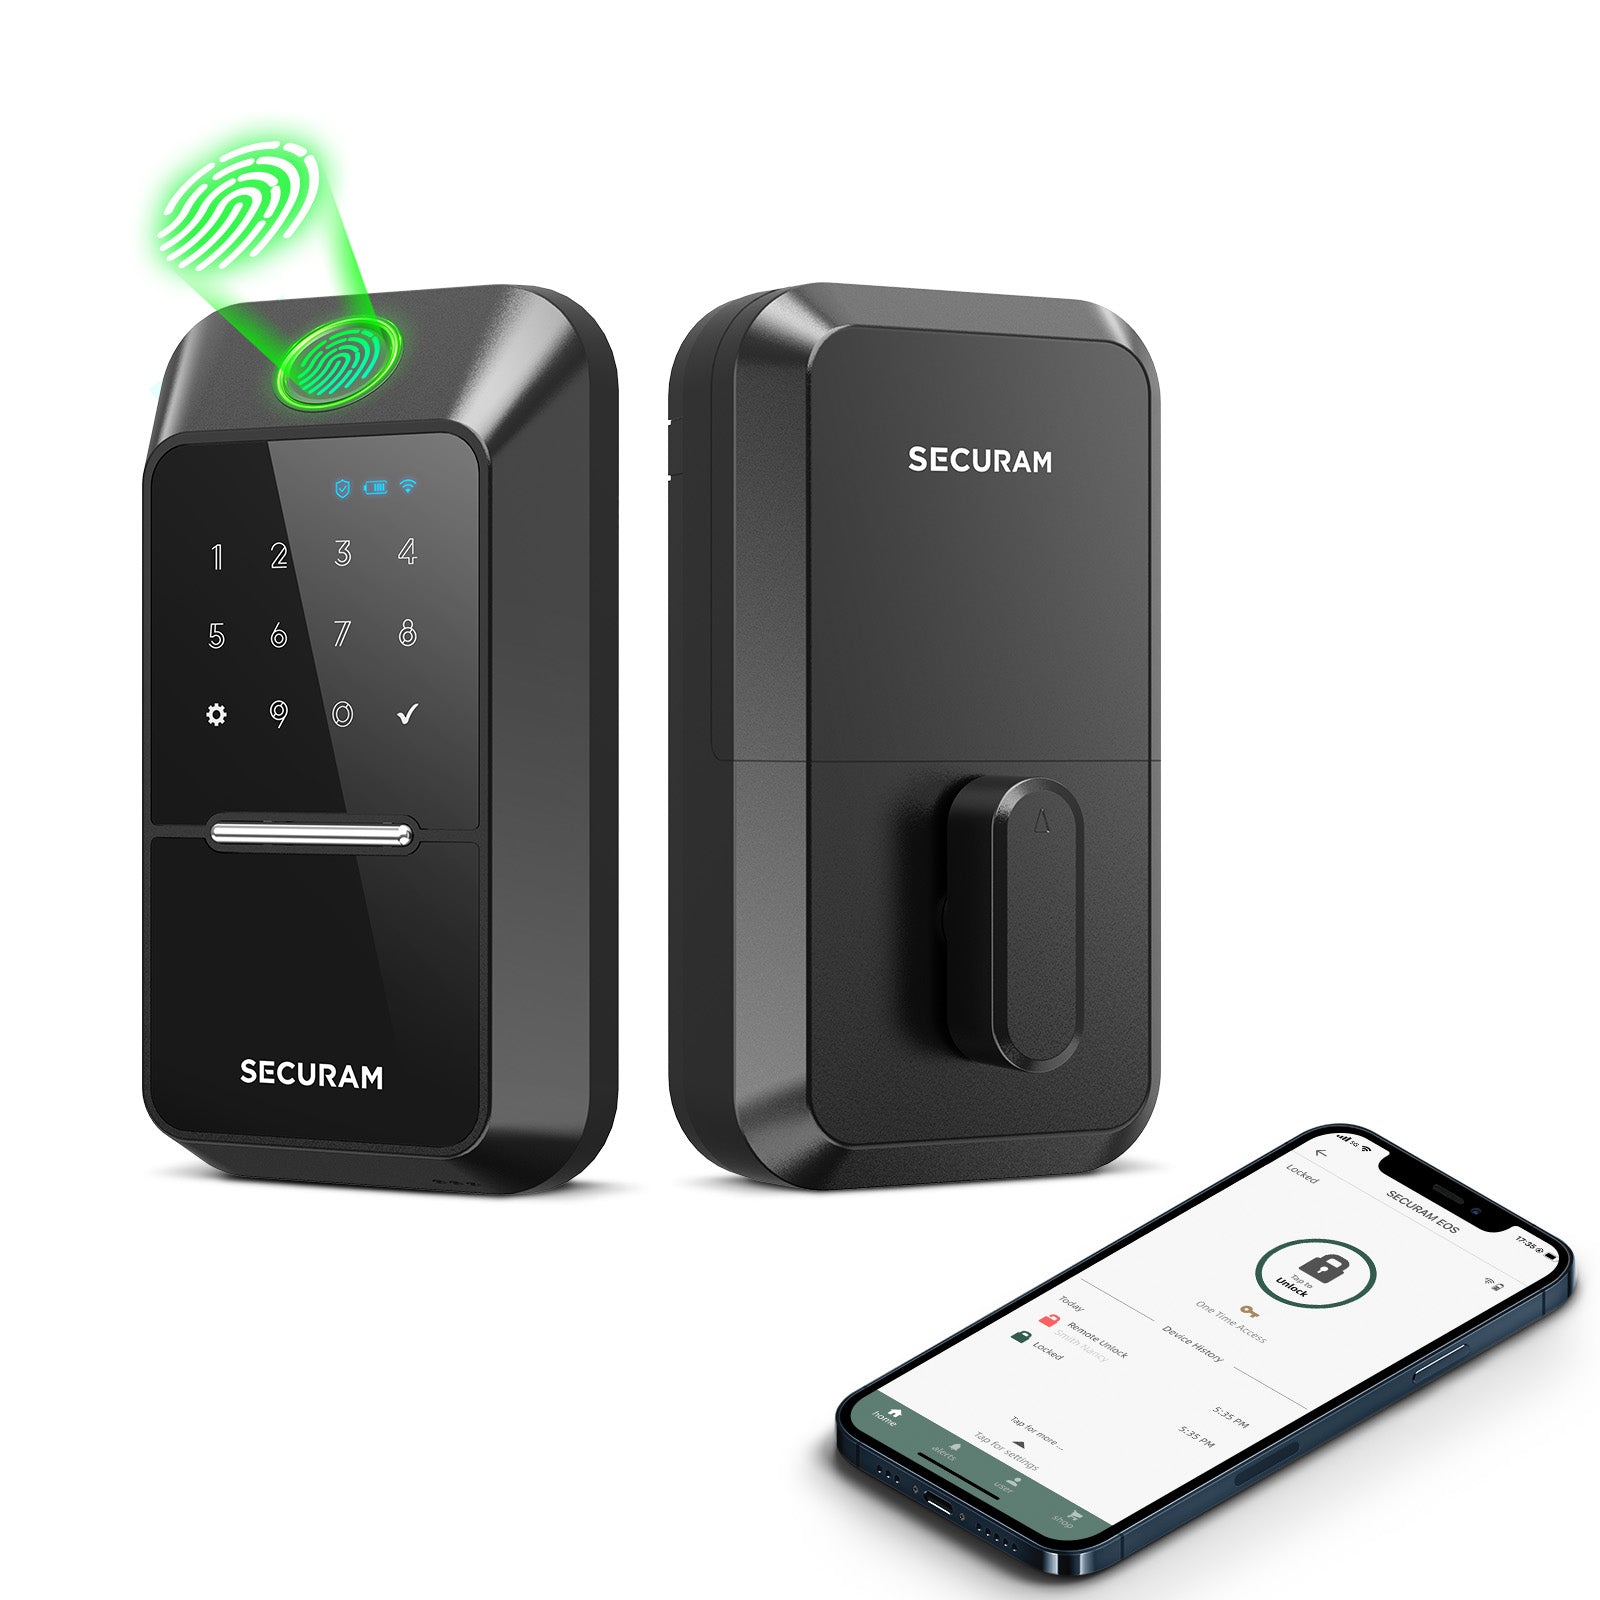 A SECURAM EOS Wi-Fi Smart Lock with a phone next to it.